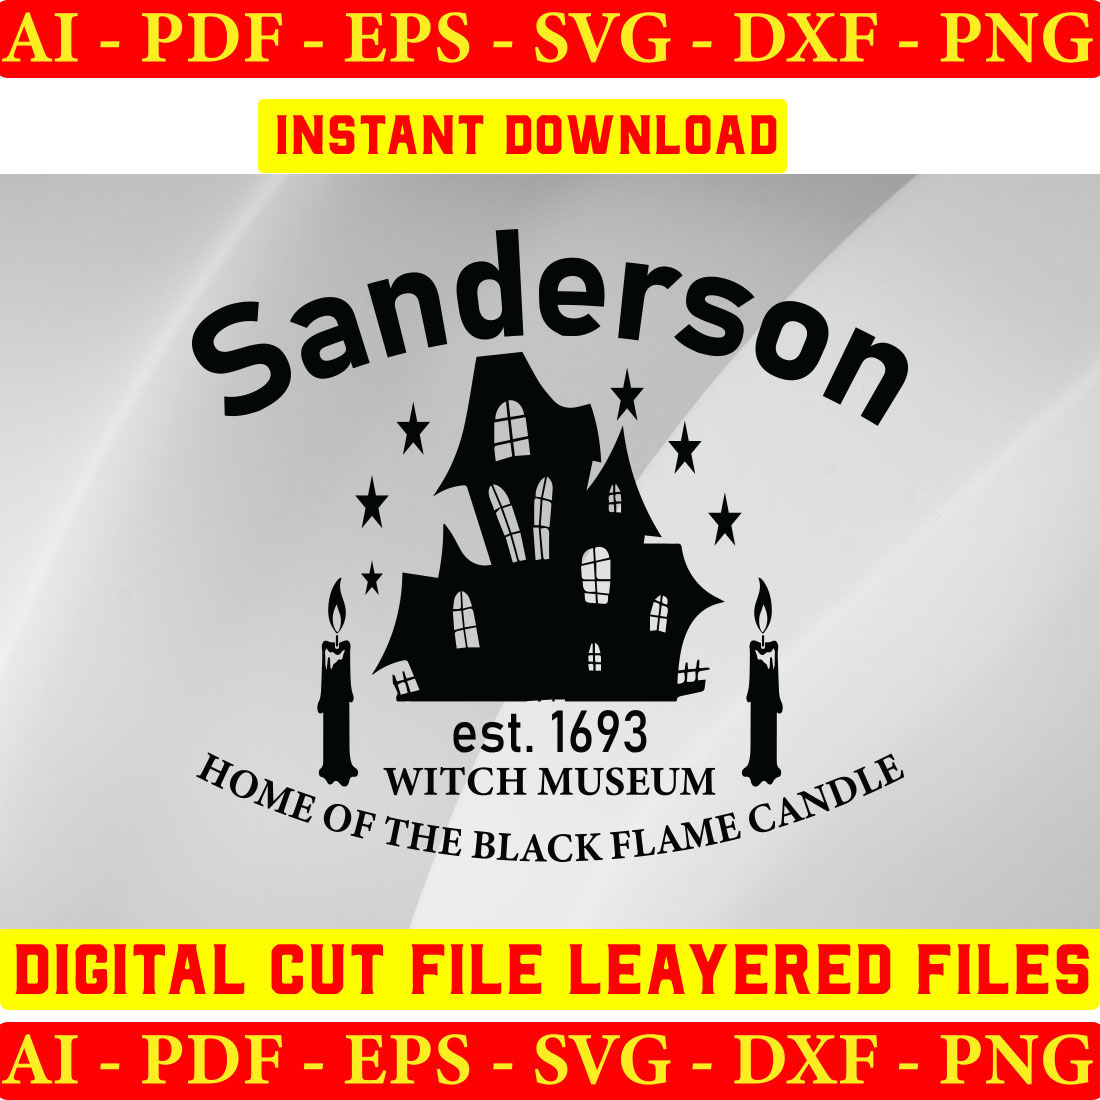 Sanderson Est 1693 Witch Museum Home Of The Black Flame Candle cover image.